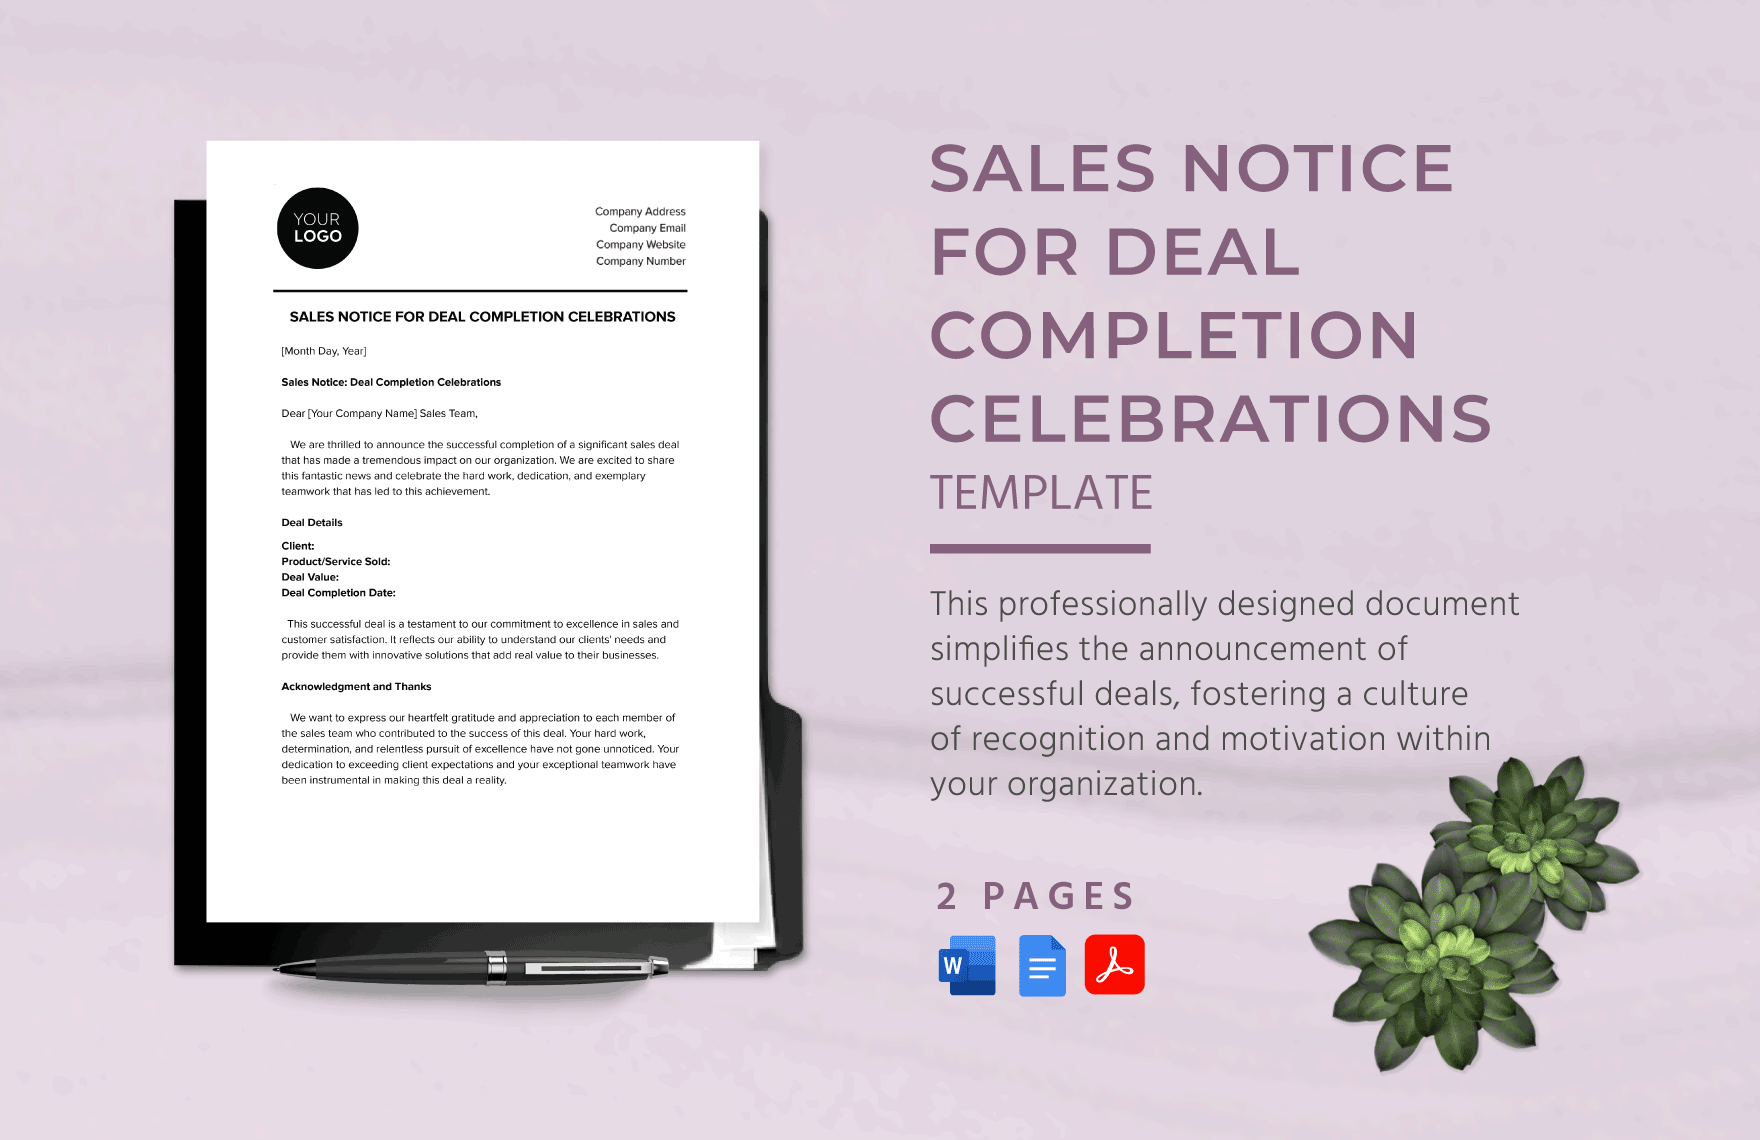 Sales Notice for Deal Completion Celebrations Template